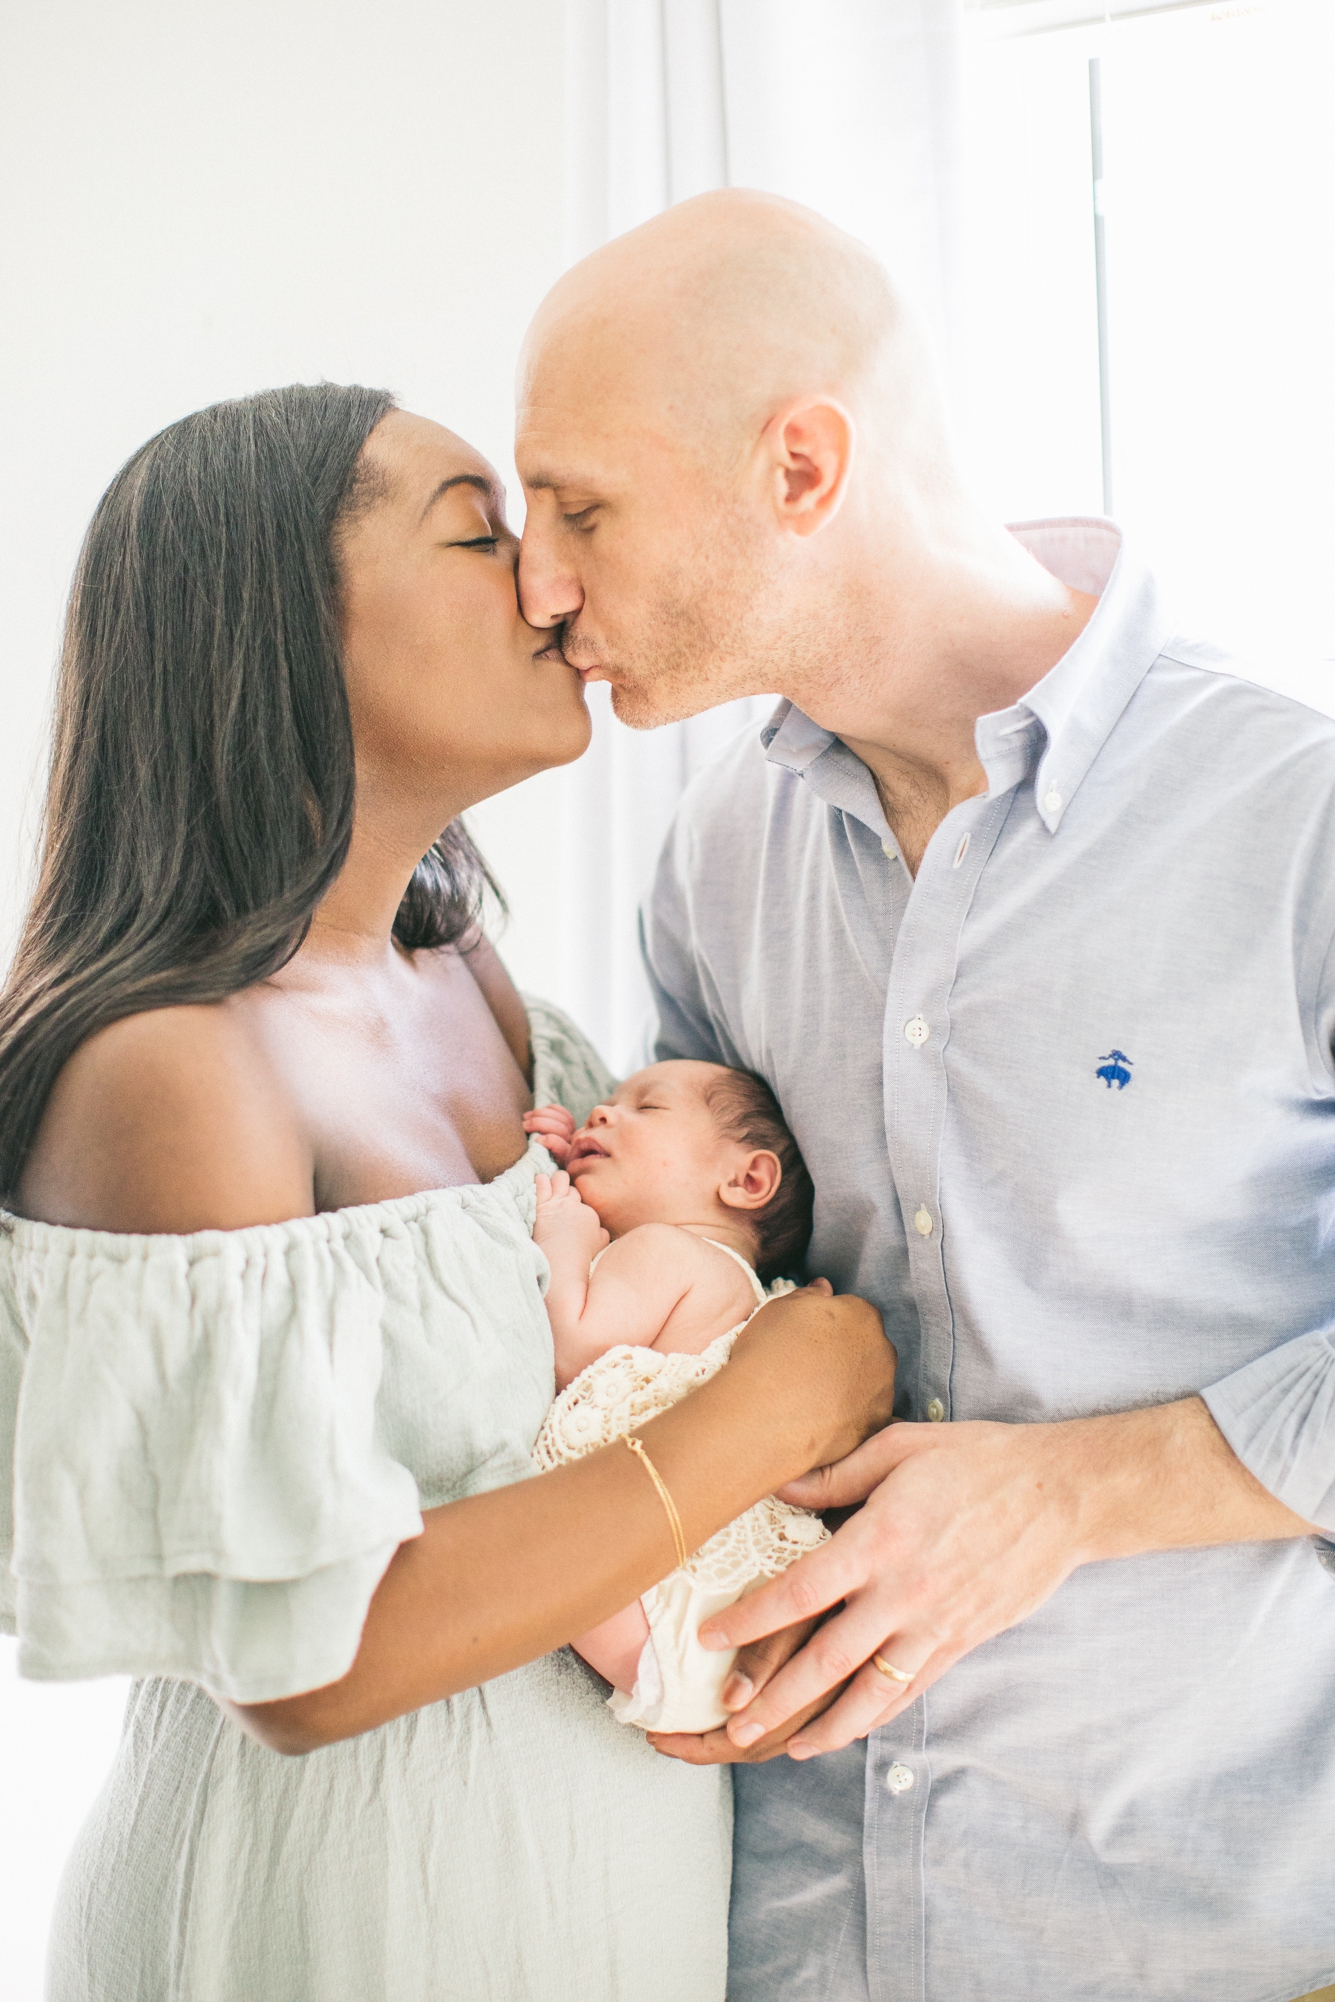 Mom and Dad kiss while holding baby during newborn session. Photo by LRG Portraits.